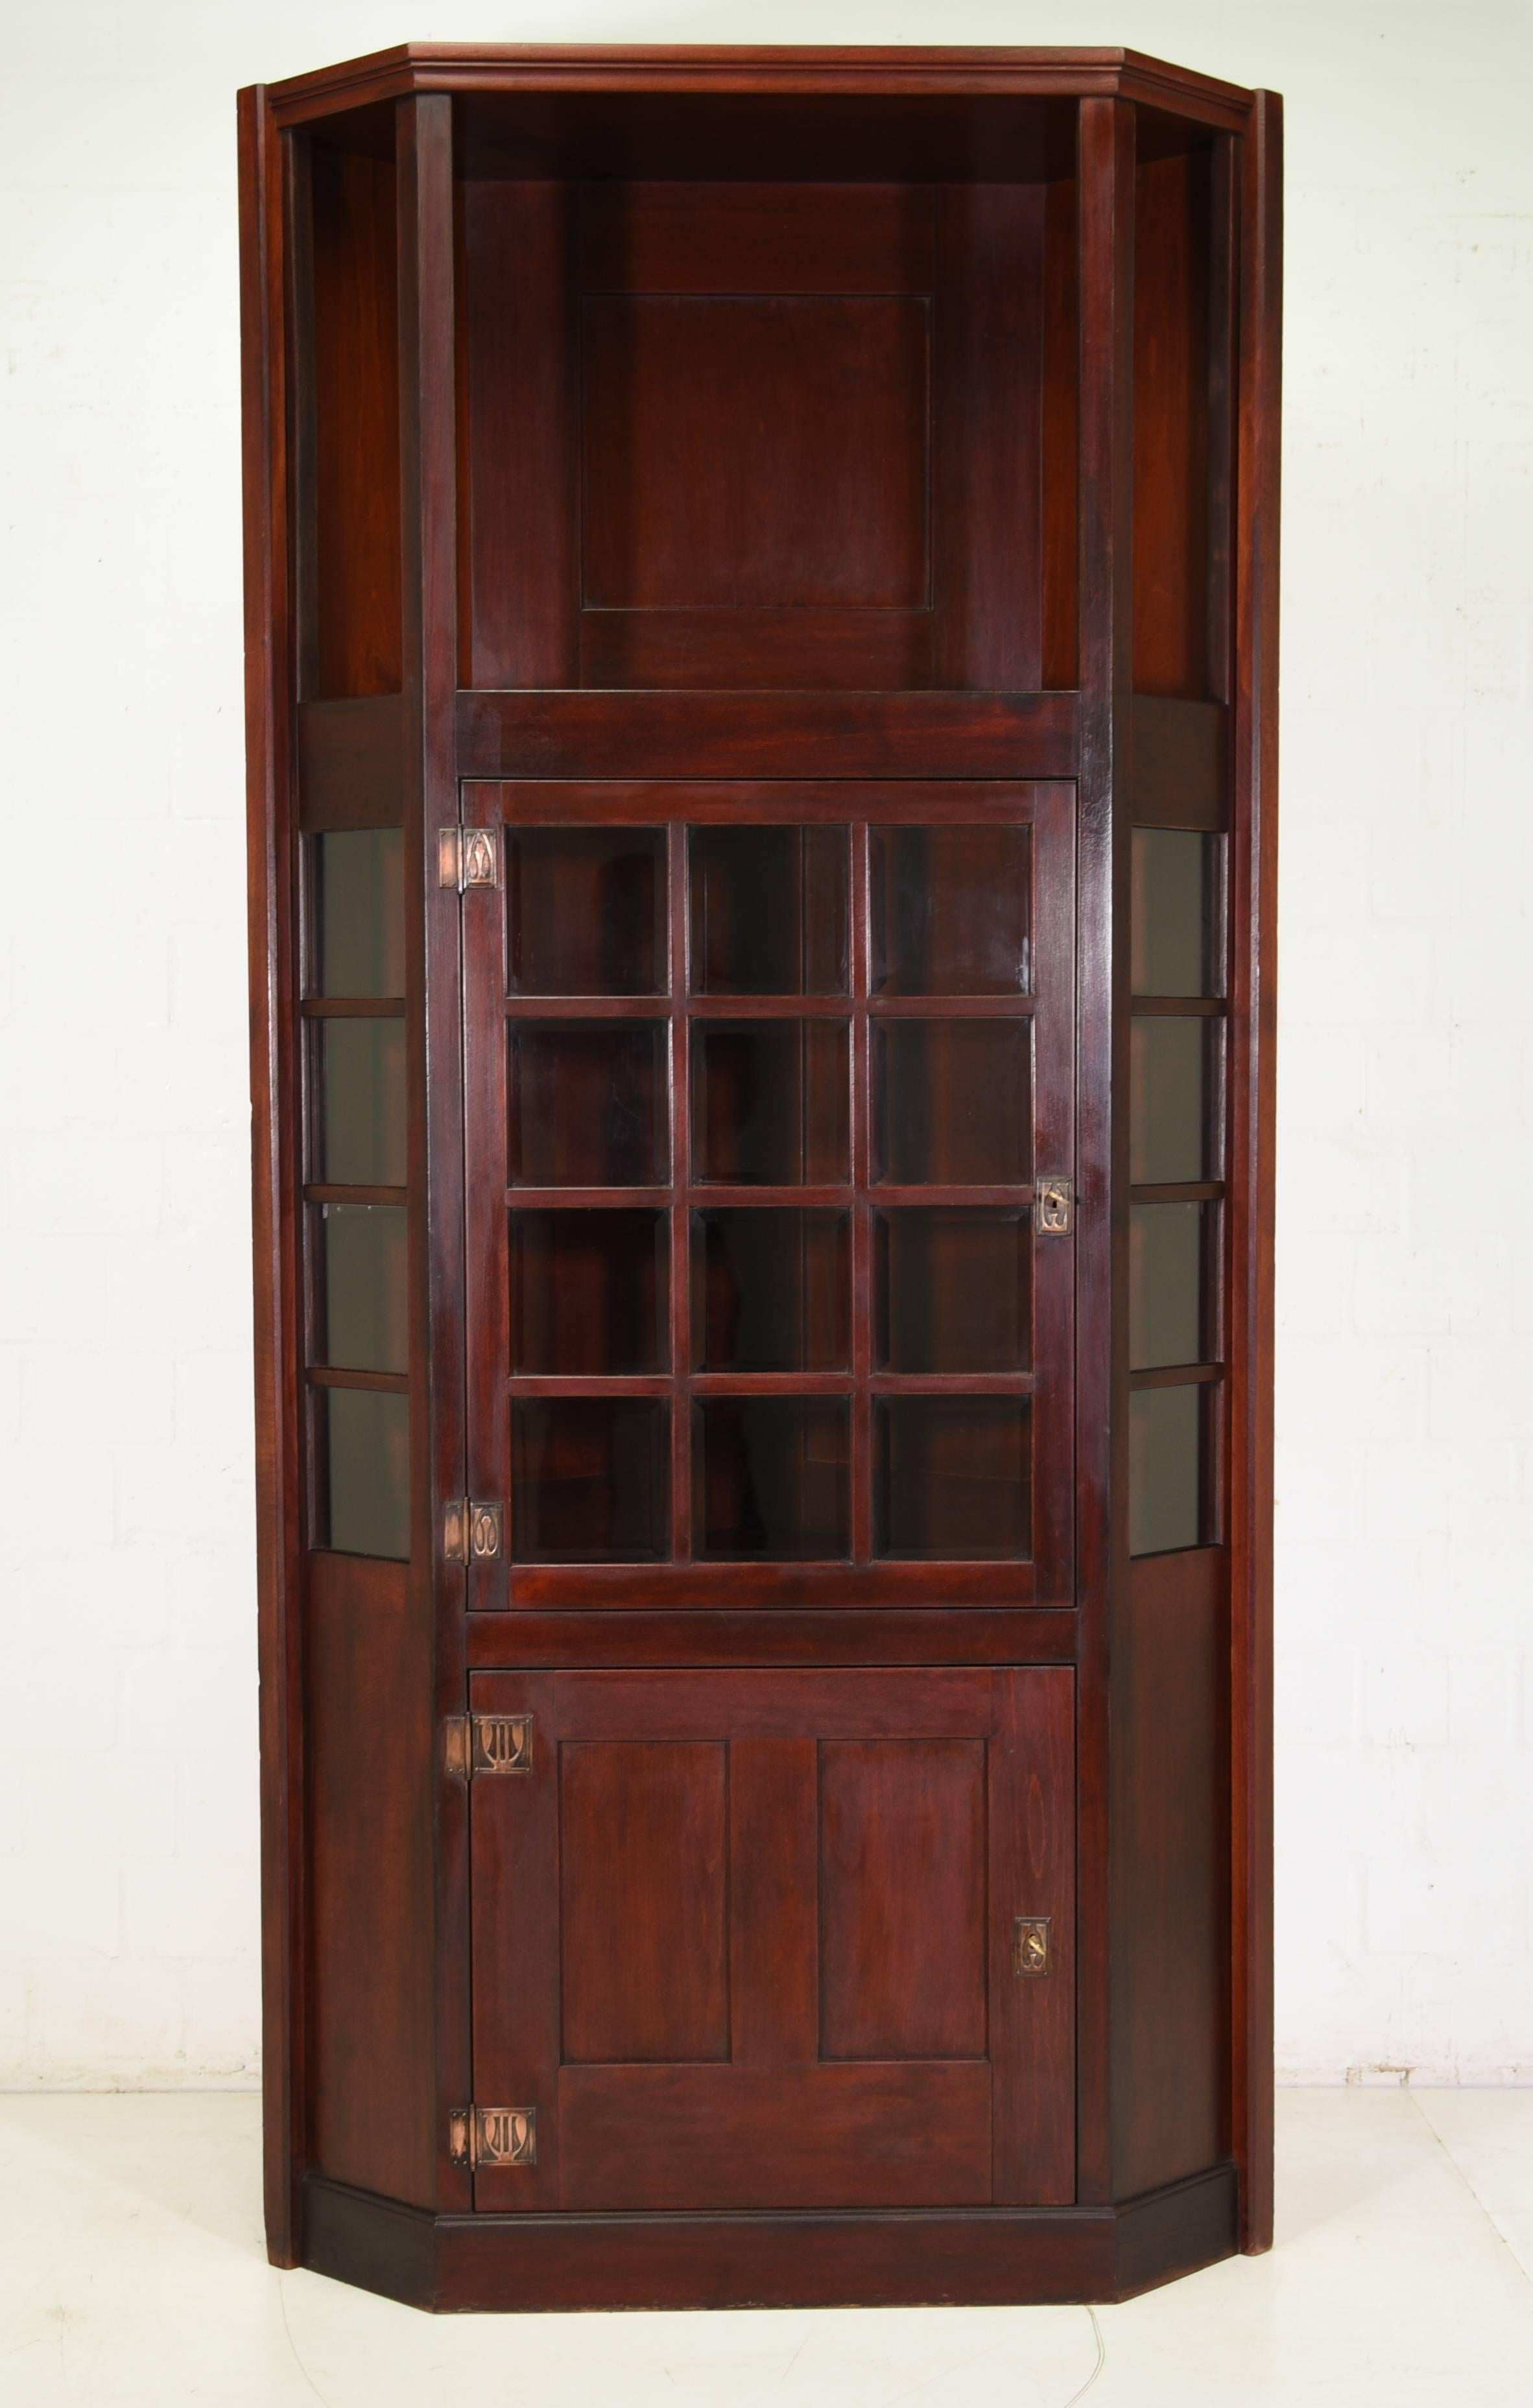 An Art Nouveau corner cupboard from circa 1915 in mahogany colors. The corpus is completely made of solid wood mostly of birch with oak accentuations. The fittings, locks and keys are originals from the manufacture and still work. The center has a